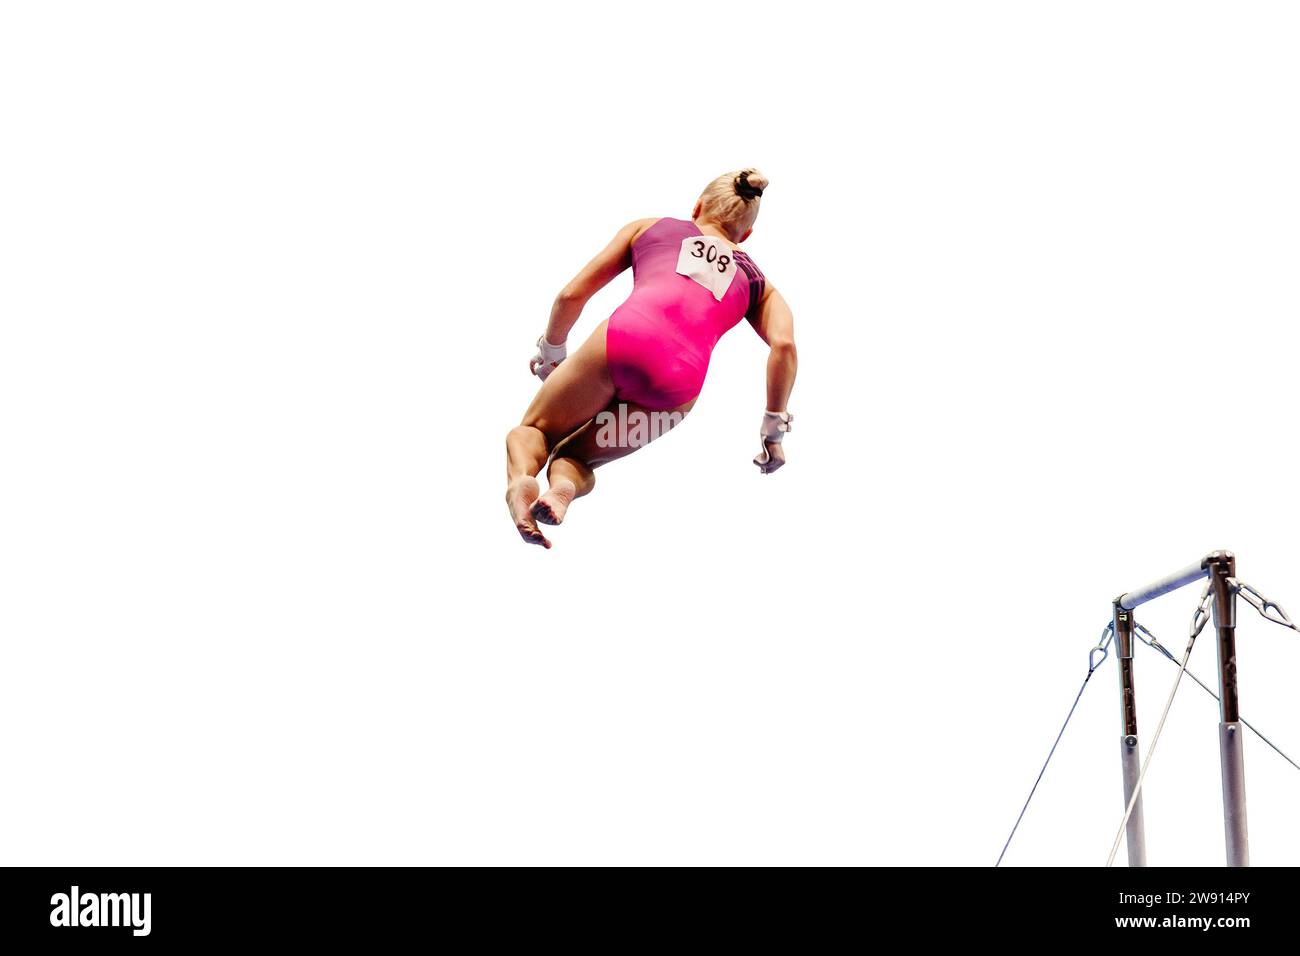 female gymnast performing somersault gymnastics on uneven bars, isolated on white background Stock Photo